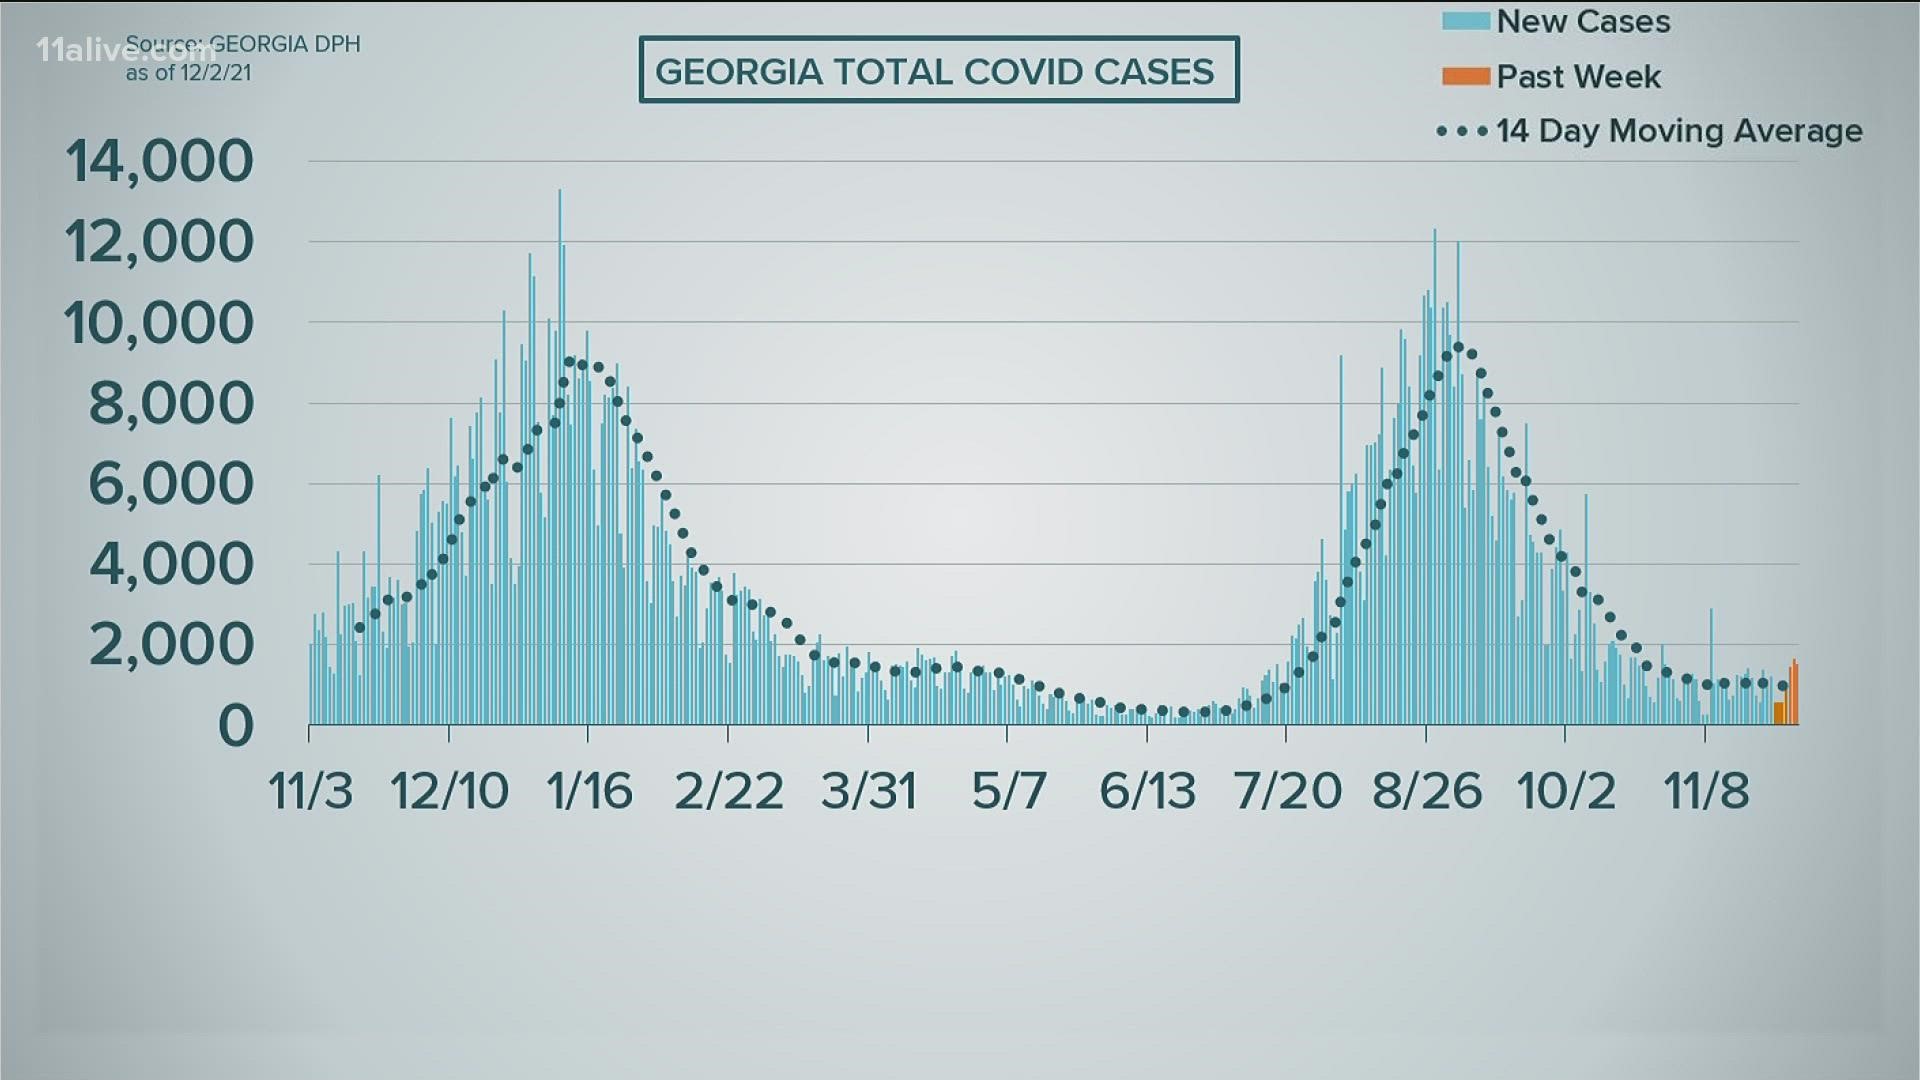 This week, Georgia has recorded about 1,100 cases each day.